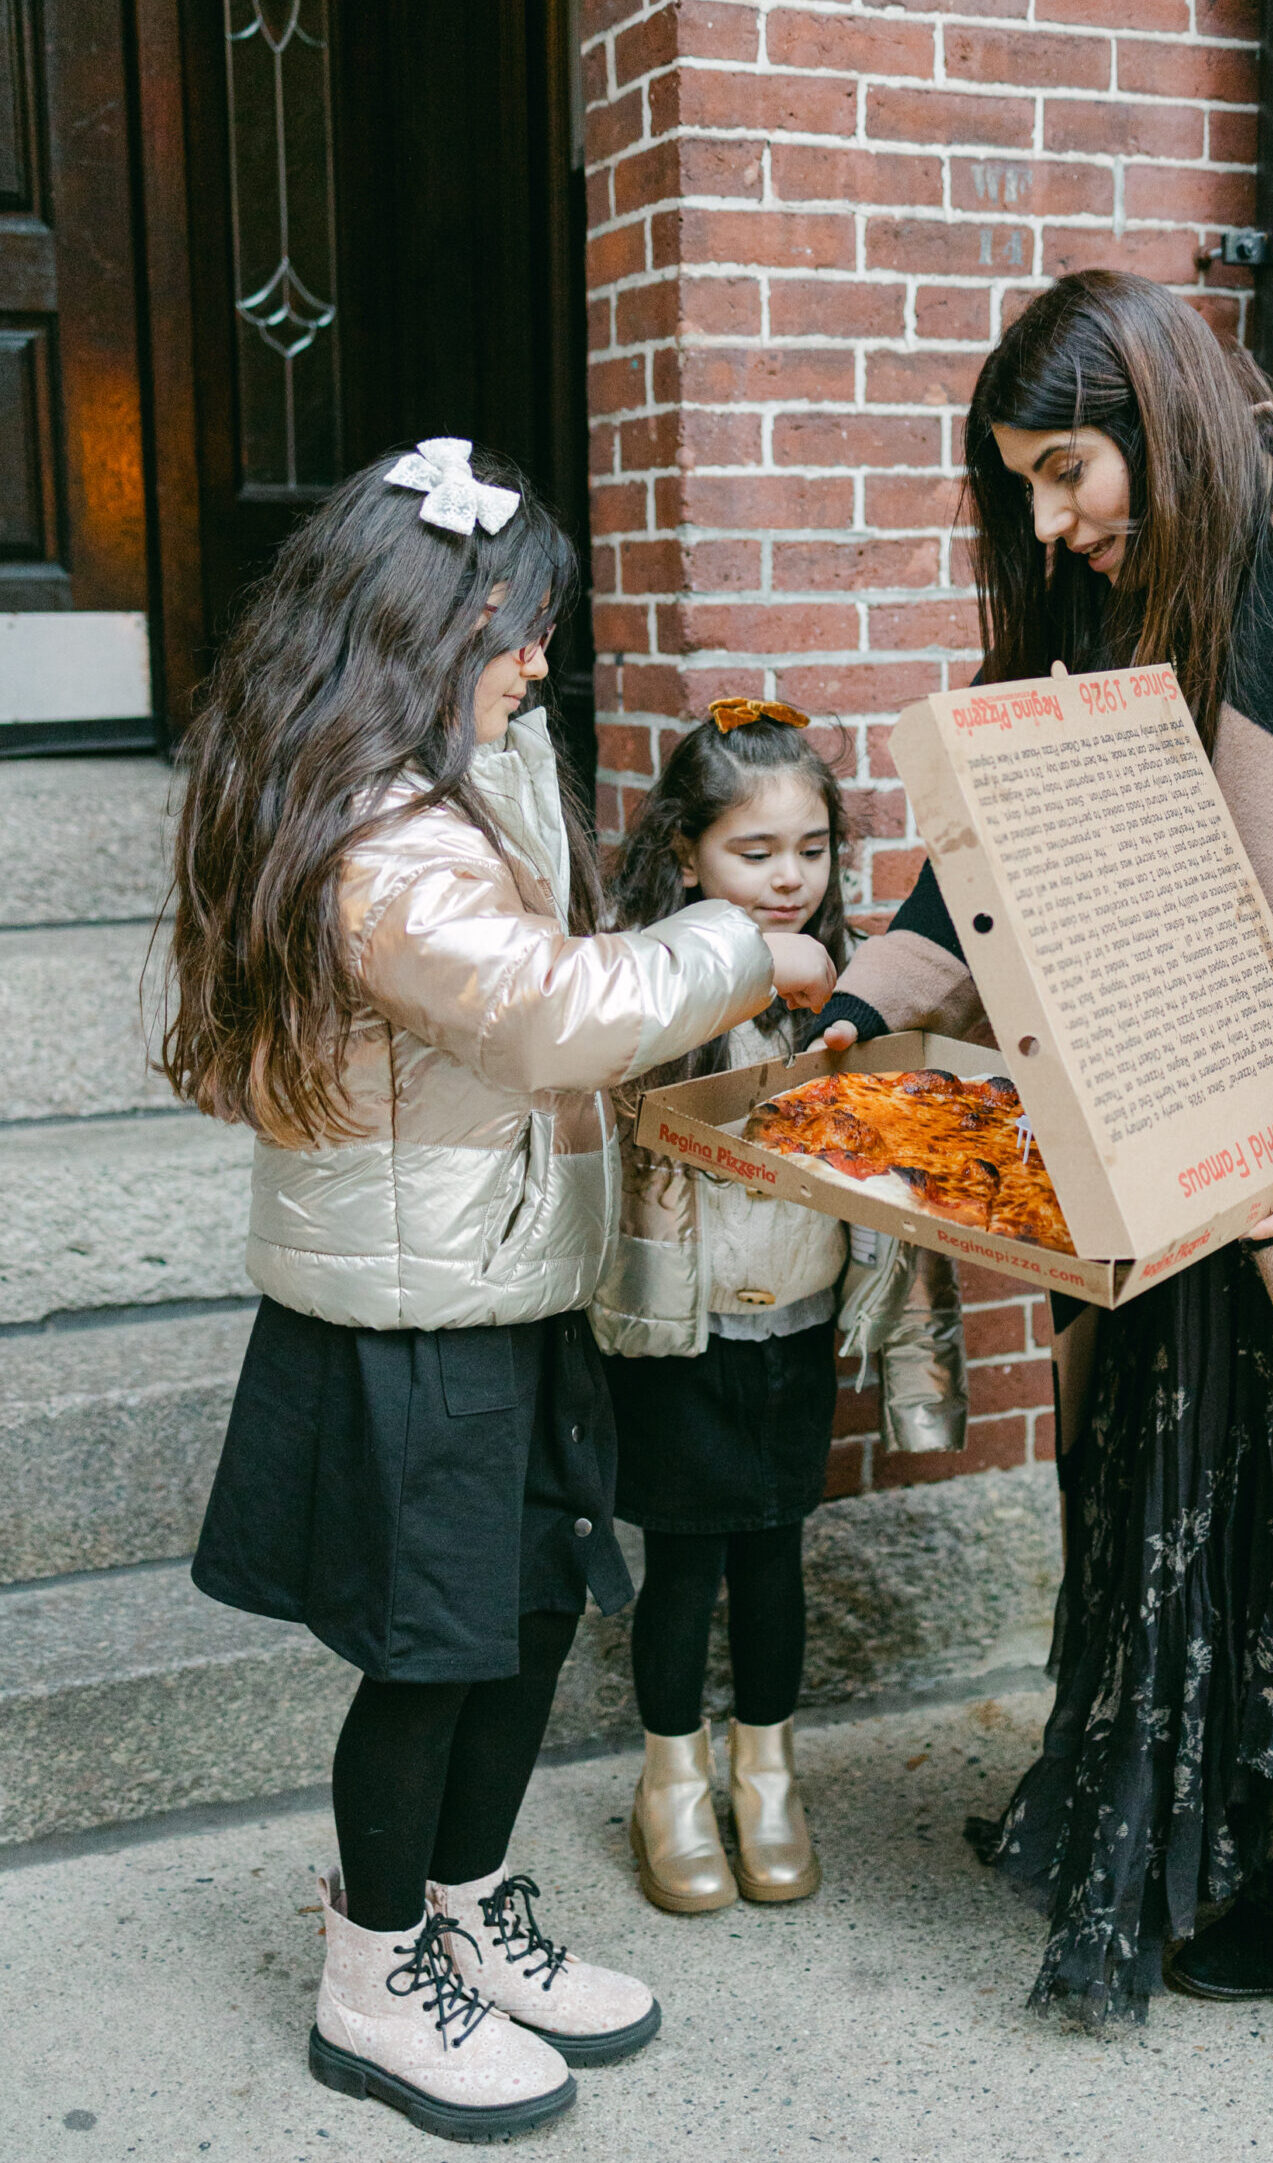 Family-Friendly Things to do in Boston North End - Regina’s Pizza